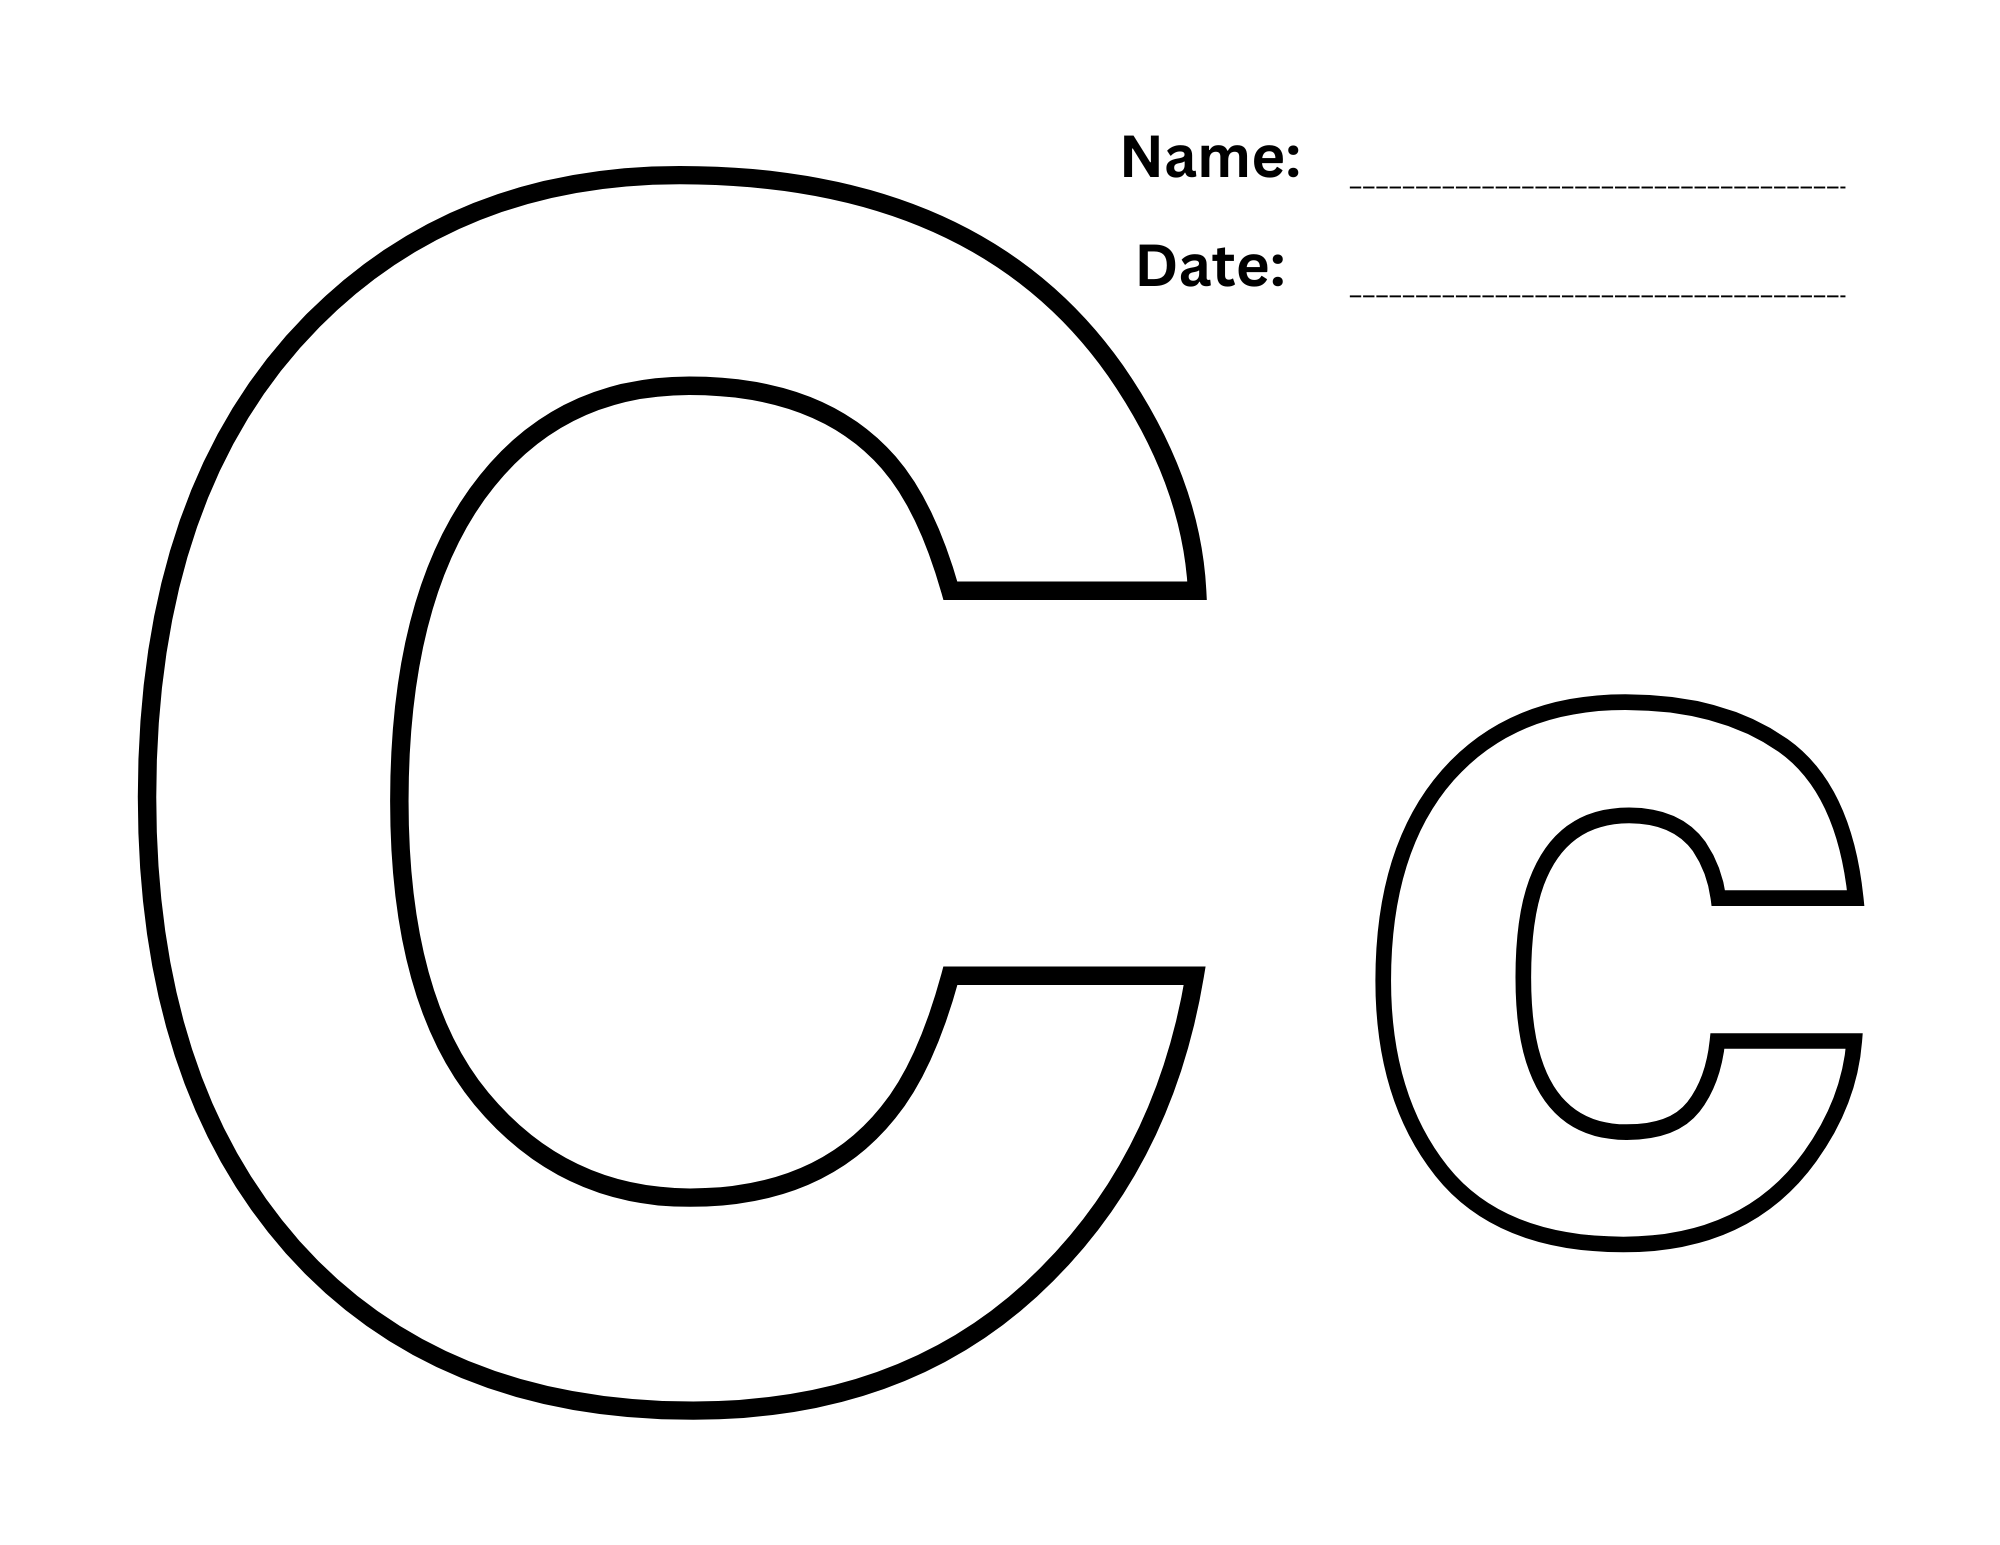 An intricate coloring page featuring a capital and lowercase letter 'C'